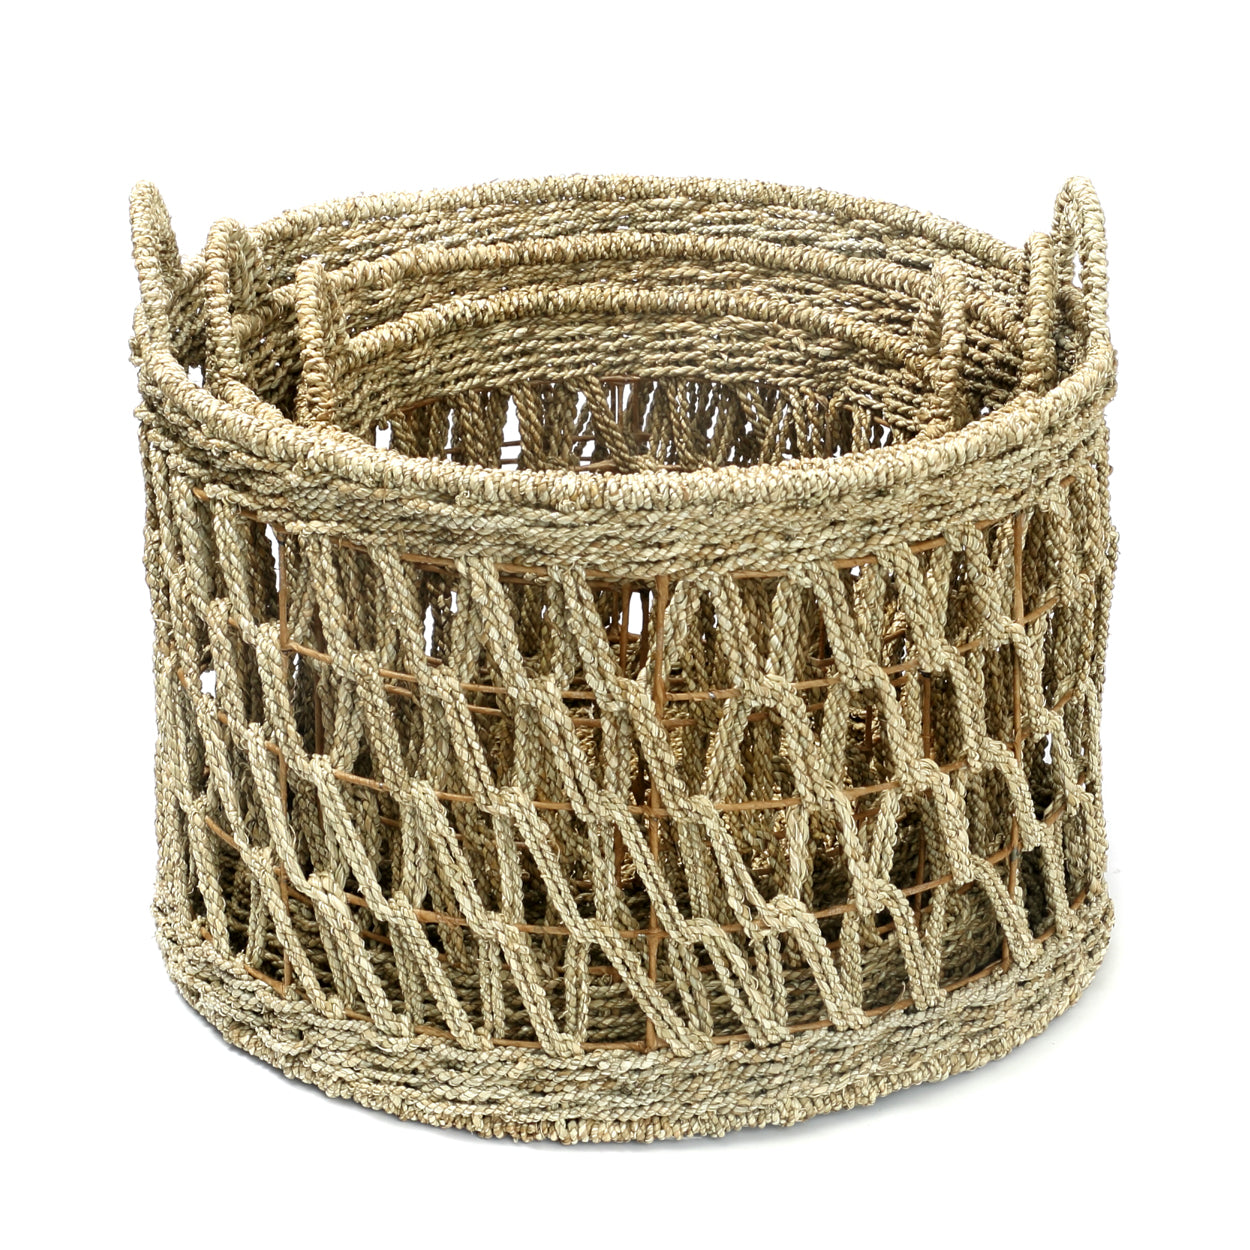 THE PERFORE Baskets Set of 3 folded